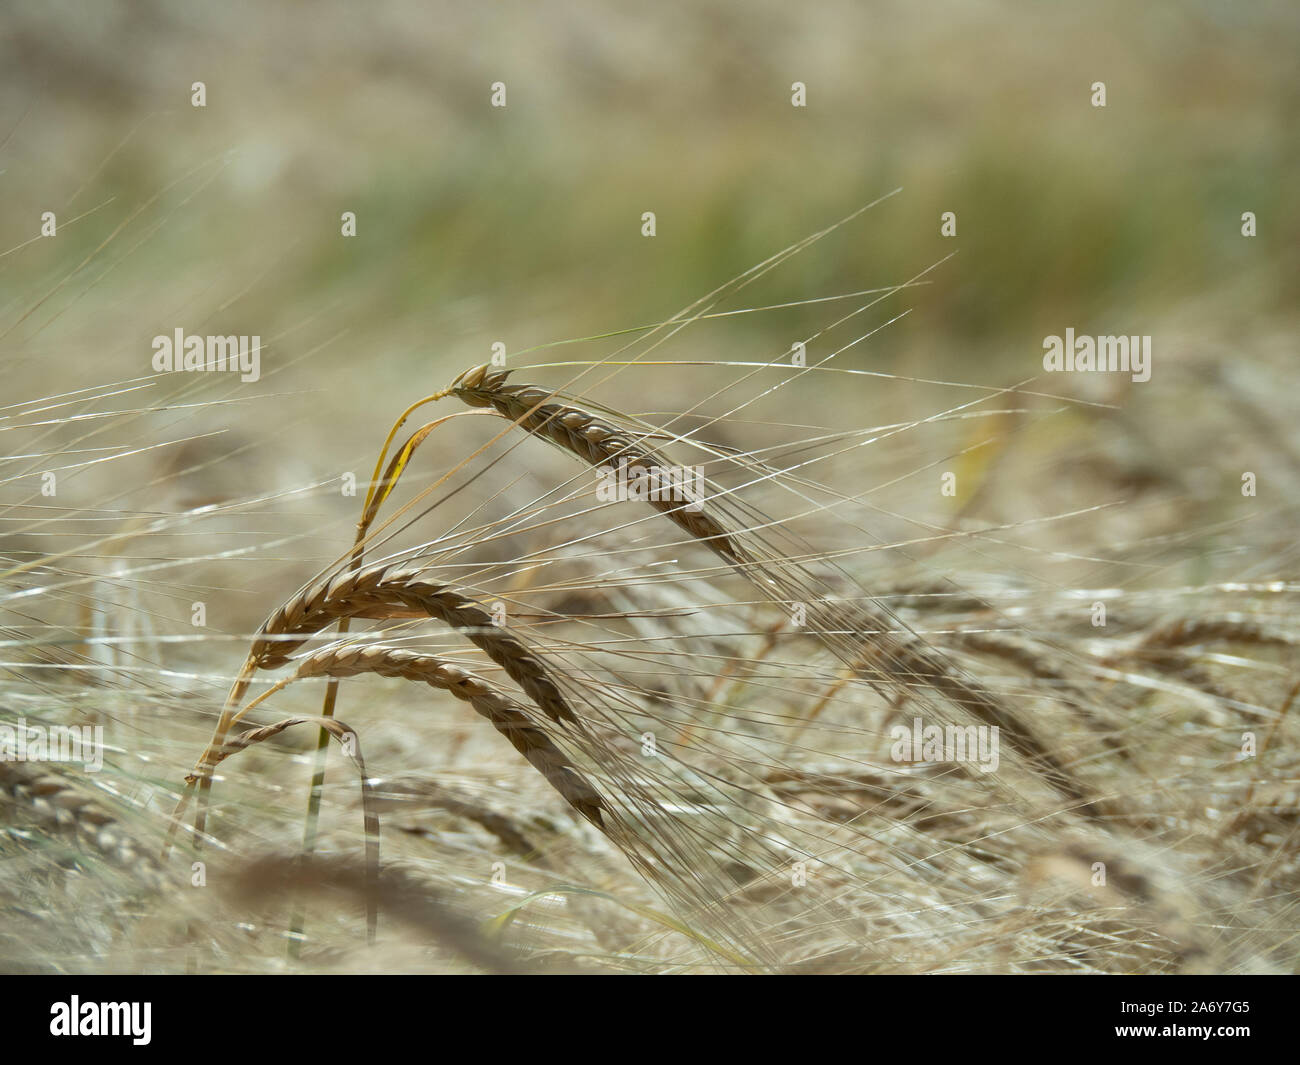 A single ripe barley ear picked out against the barley field Stock Photo